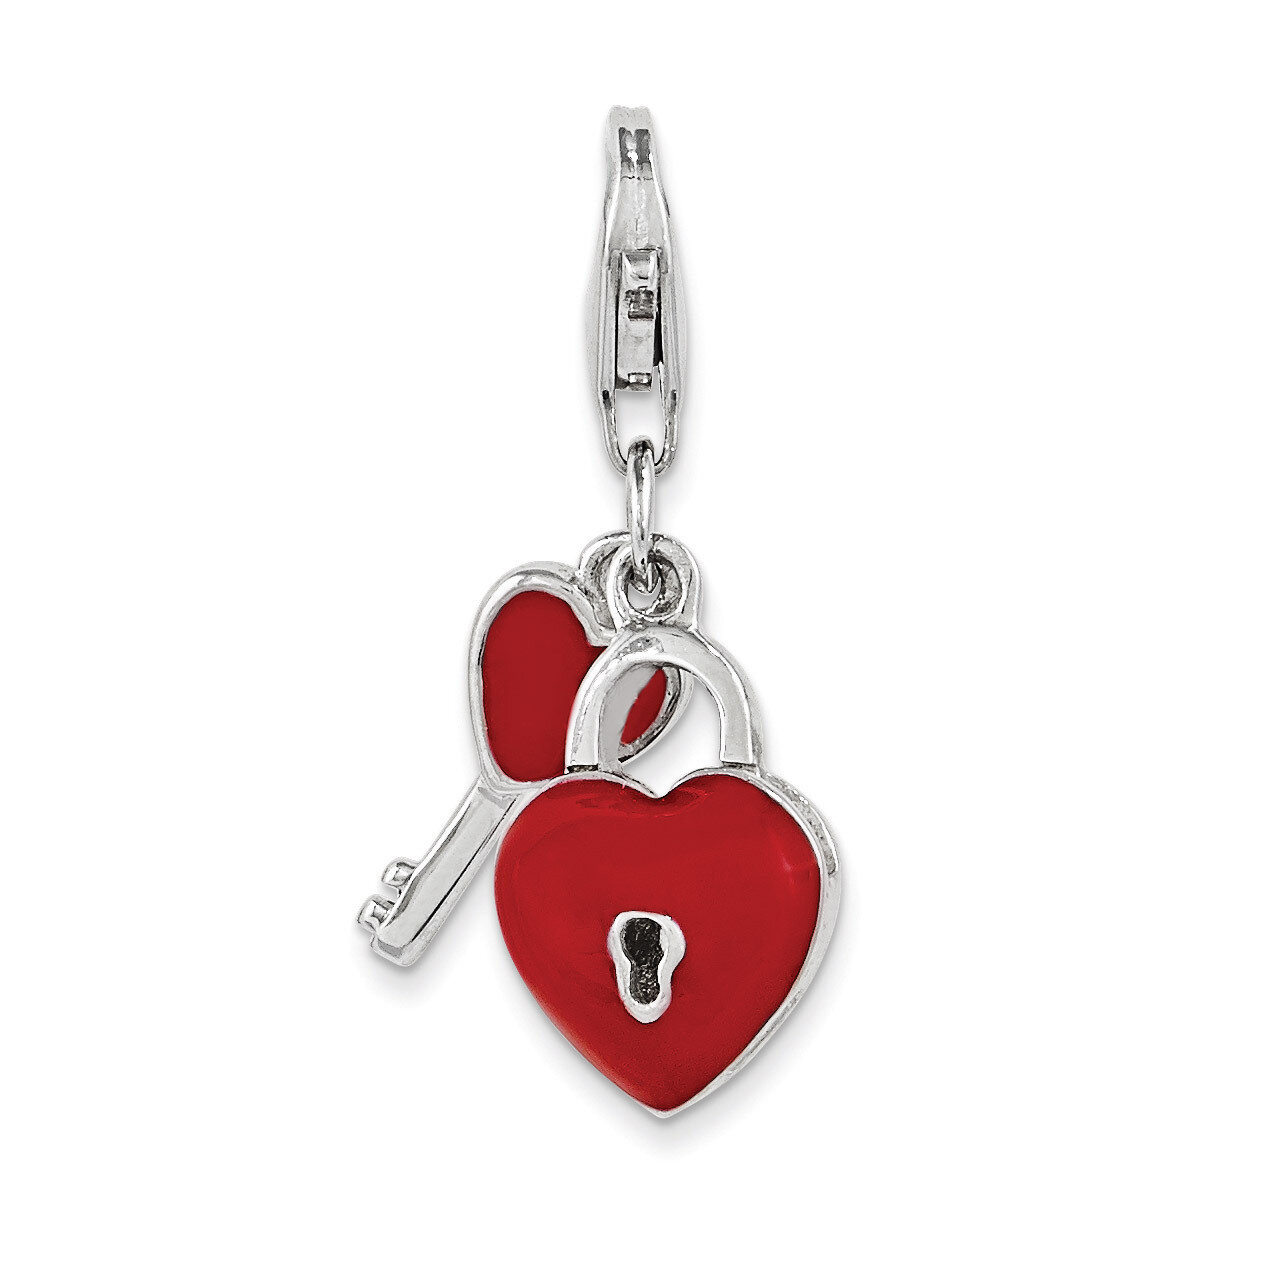 3D Heart and Key Charm Sterling Silver Enameled QCC1099